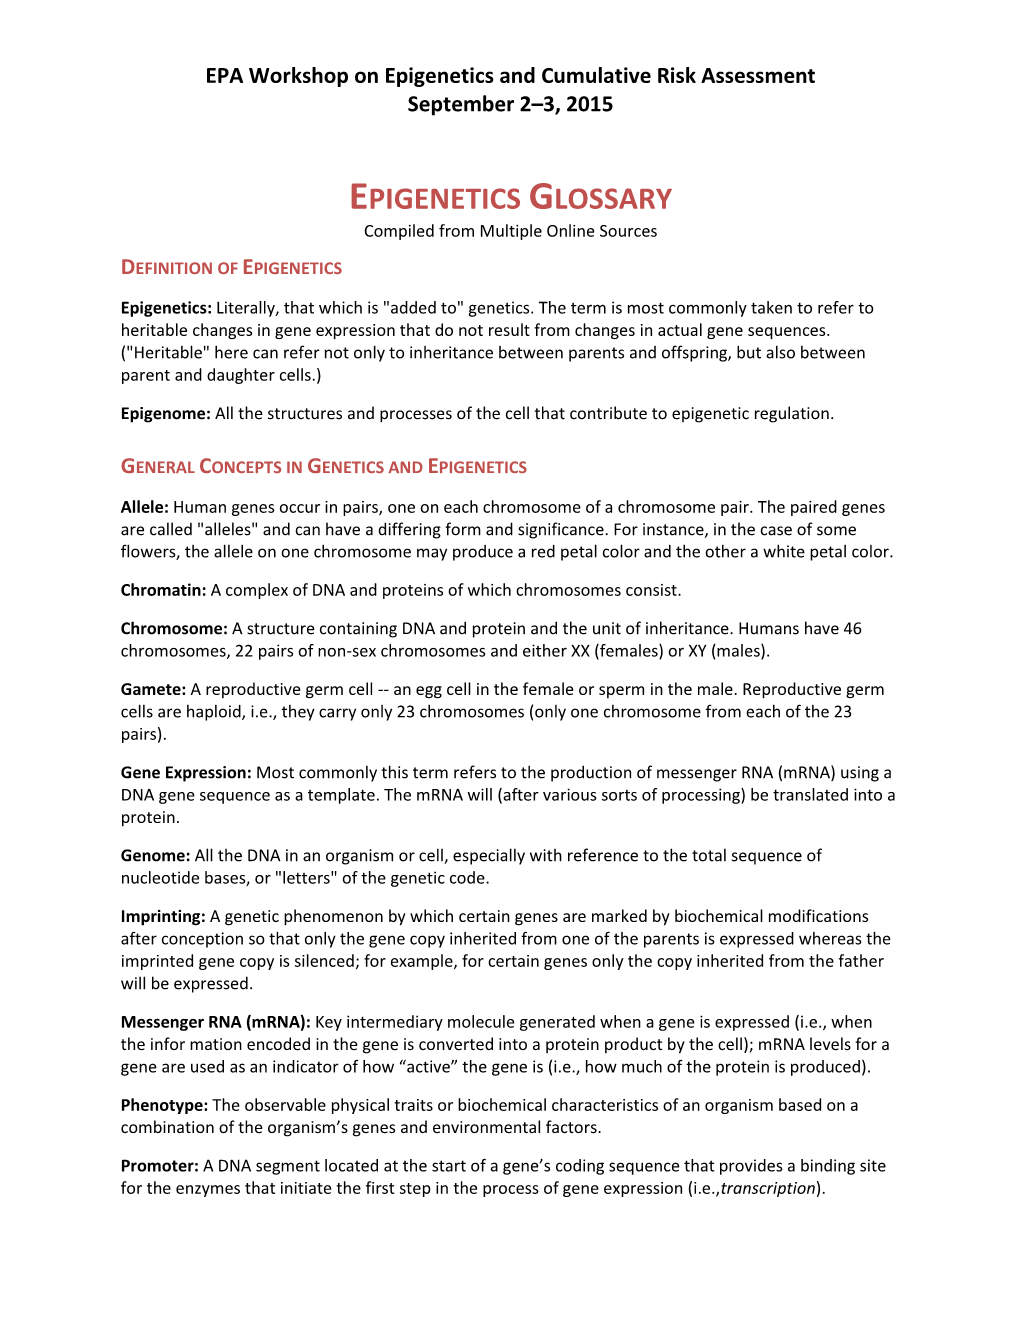 EPIGENETICS GLOSSARY Compiled from Multiple Online Sources DEFINITION of EPIGENETICS